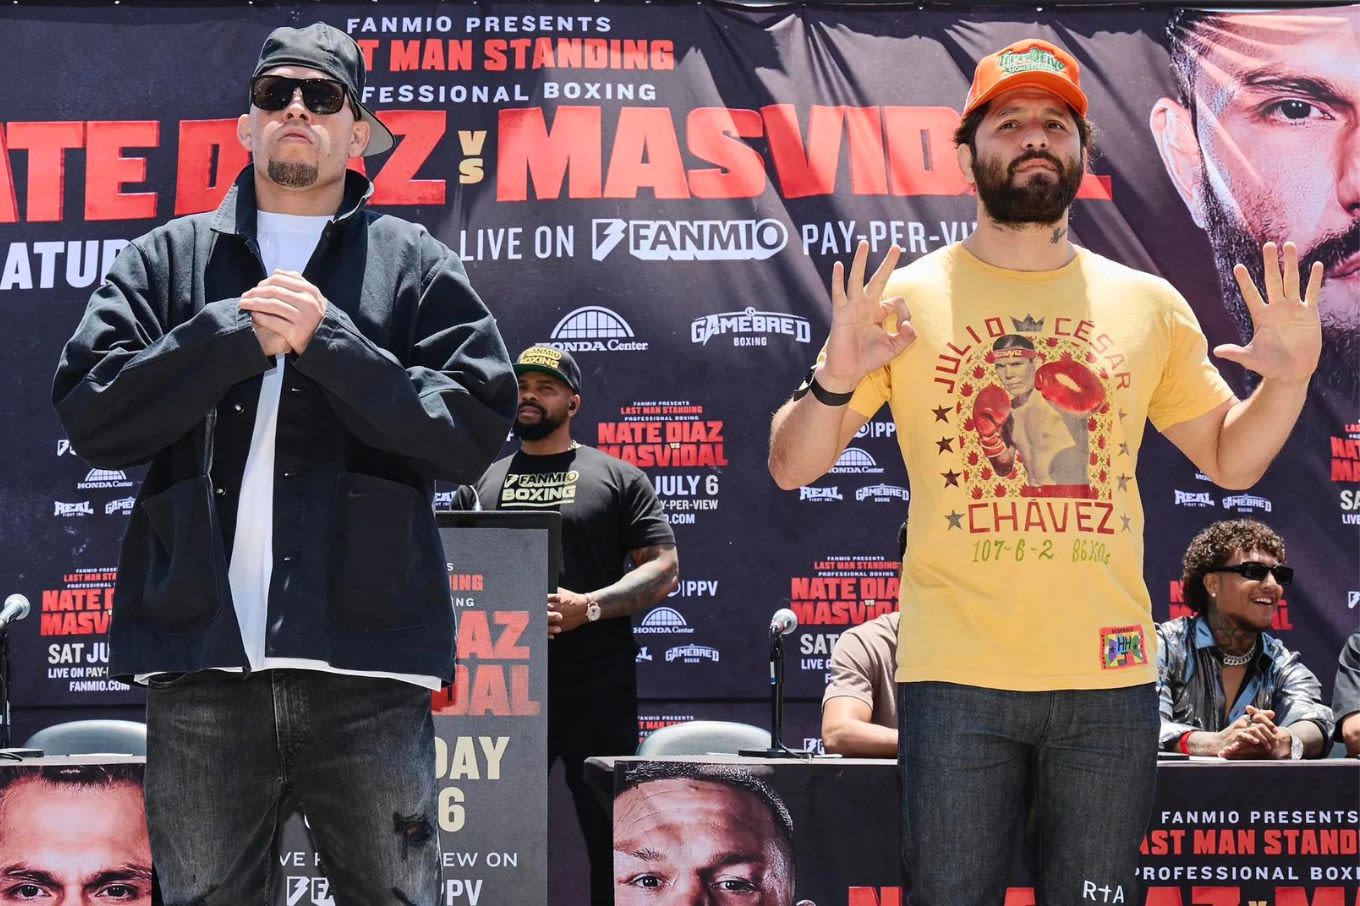 Diaz vs. Masvidal Pay-Per-View: Here’s How To Watch the Last Man Standing Boxing Livestream Online